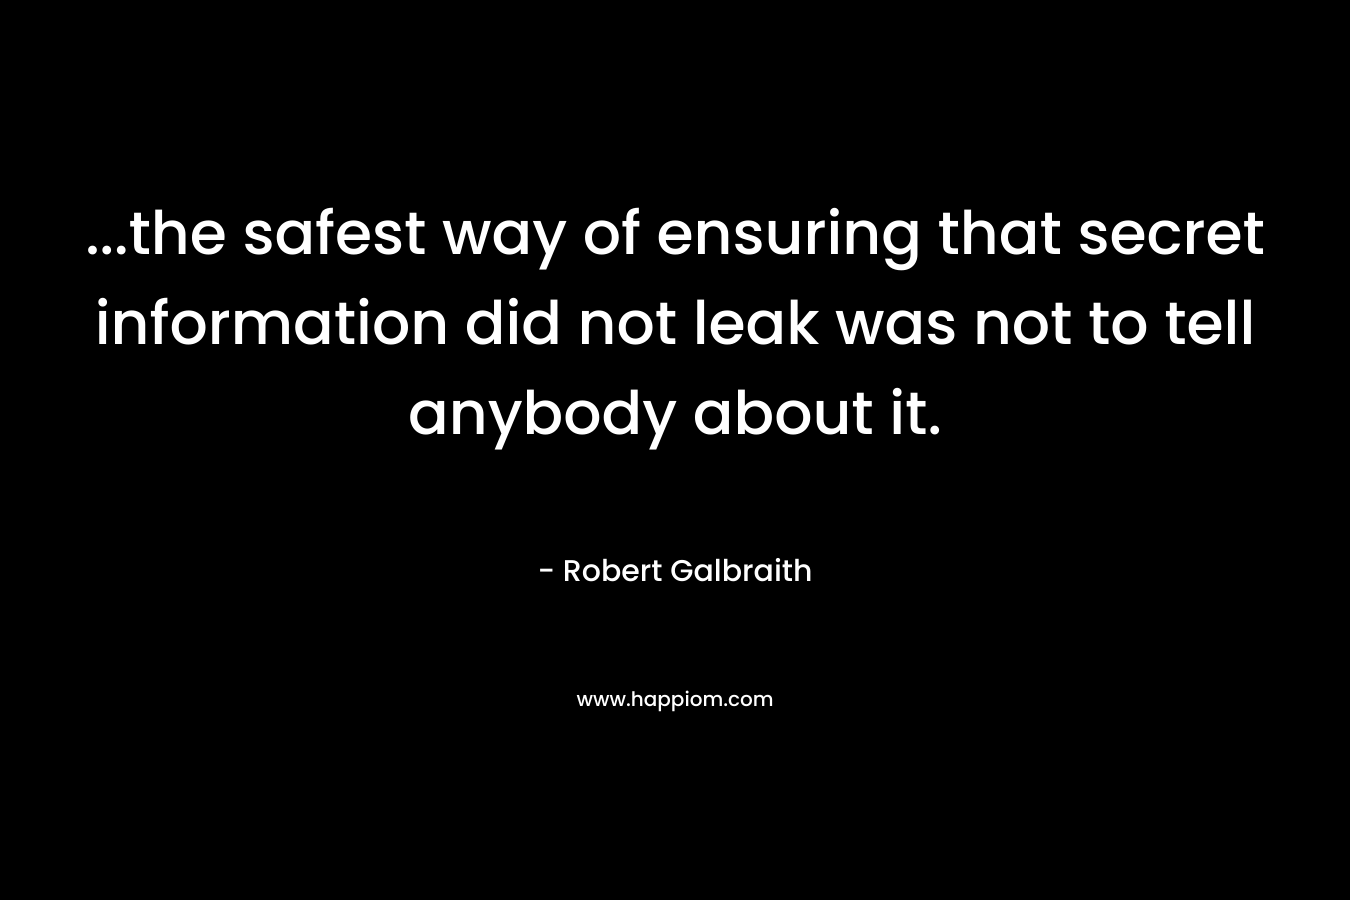 ...the safest way of ensuring that secret information did not leak was not to tell anybody about it.